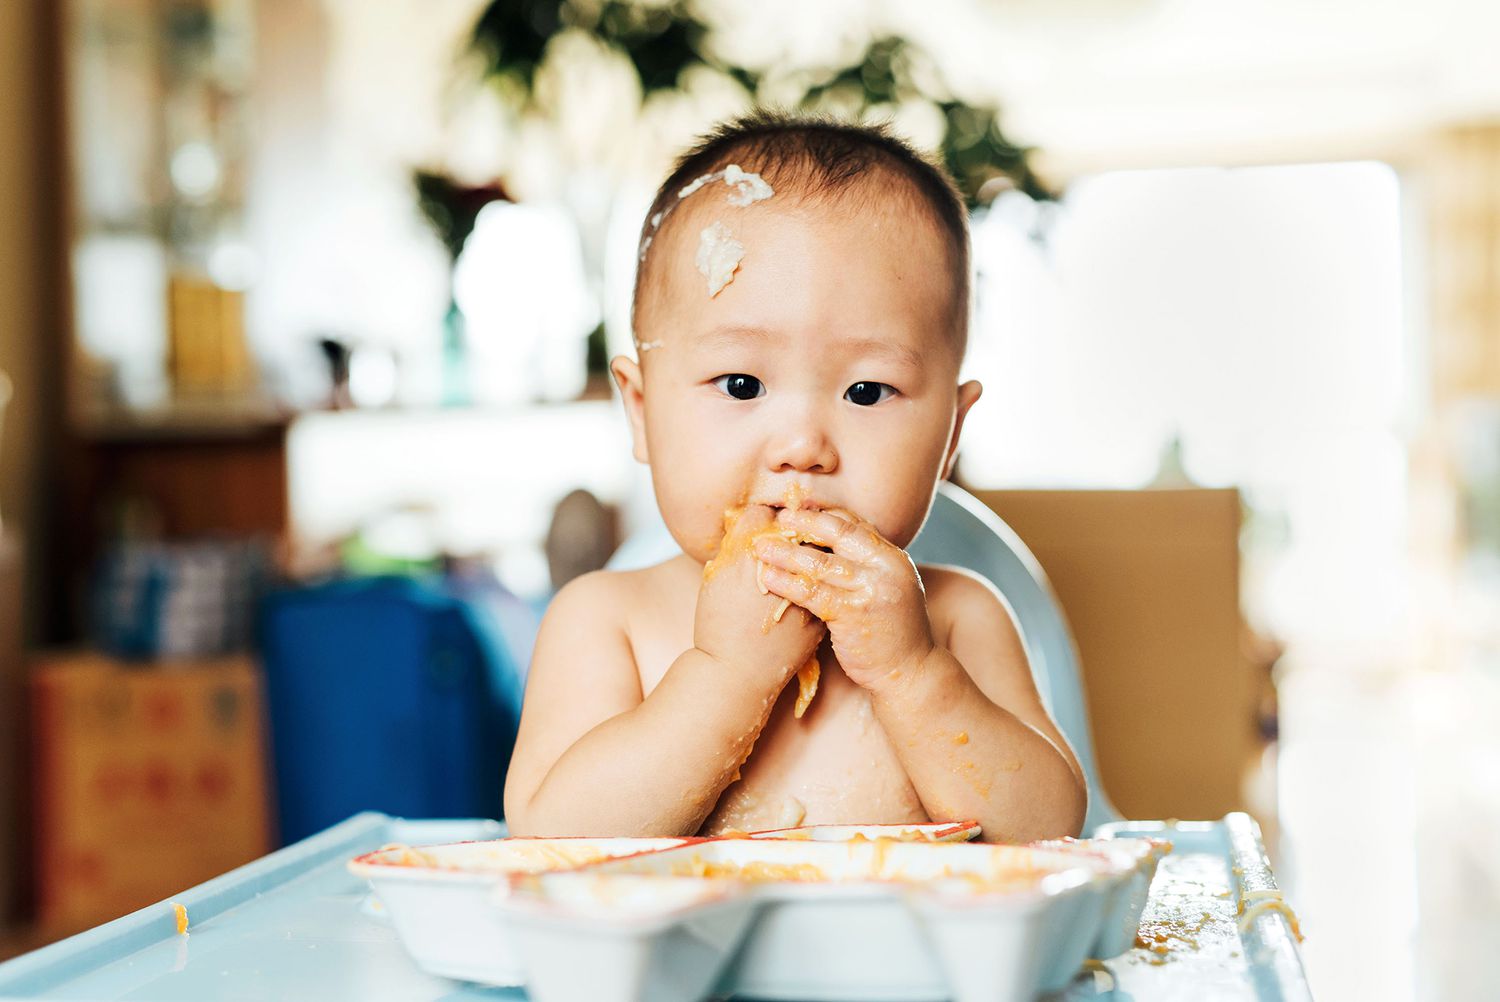 Adorable Kid Eating At Home In High Chair